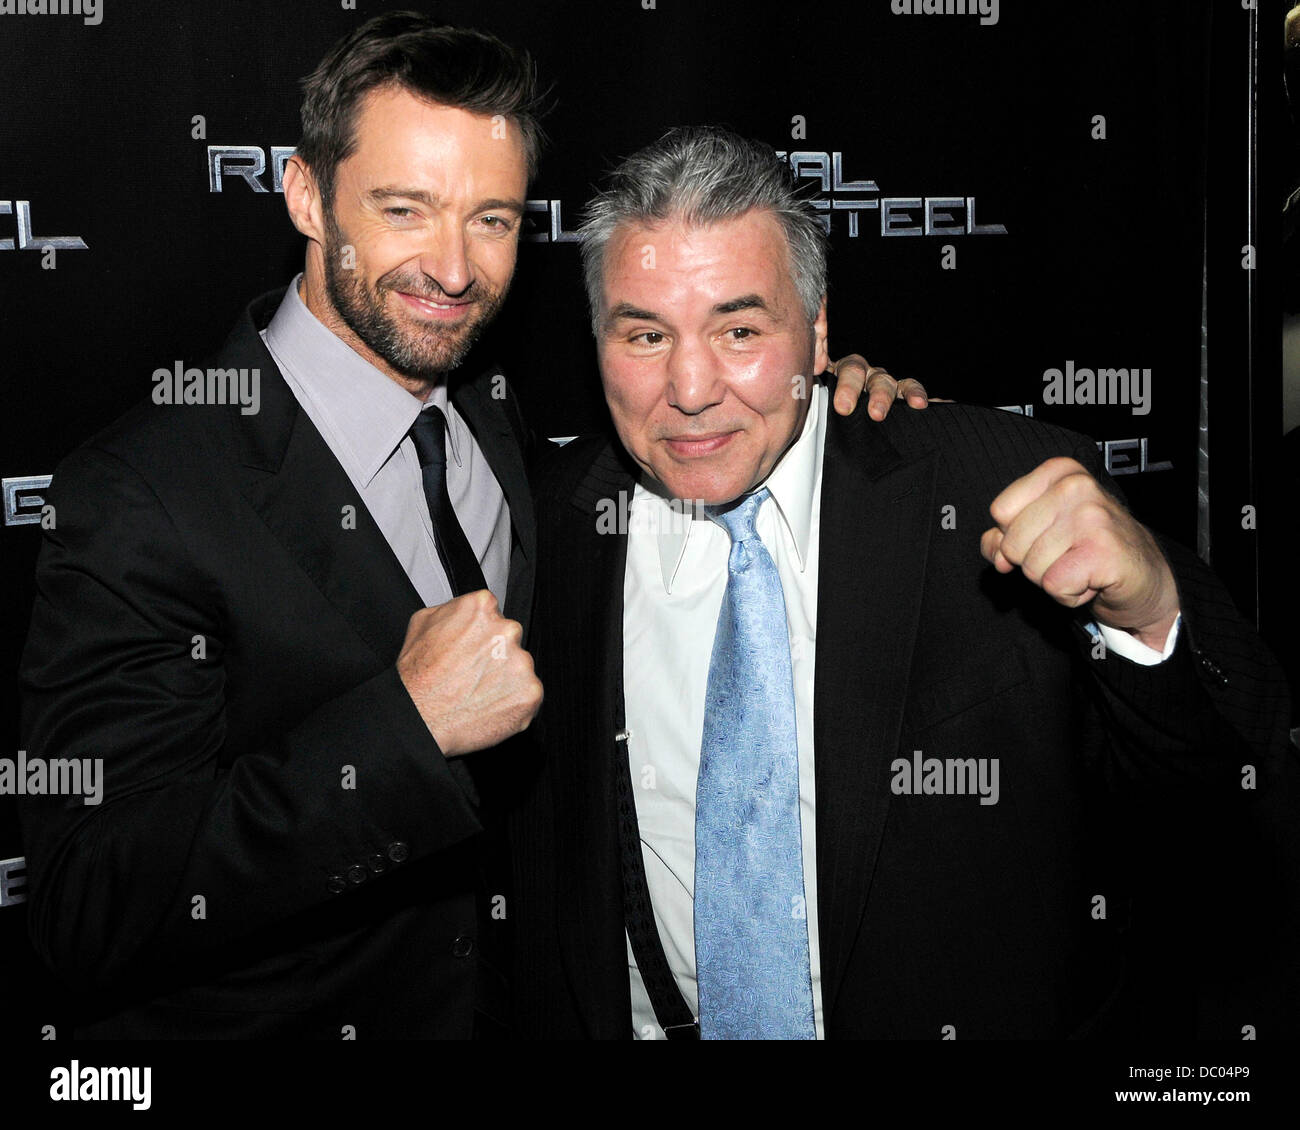 Hugh Jackman and George Chuvalo  Canadian premiere of 'Real Steel' at the Scotiabank Theatre.  Toronto, Canada - 20.09.11 Stock Photo